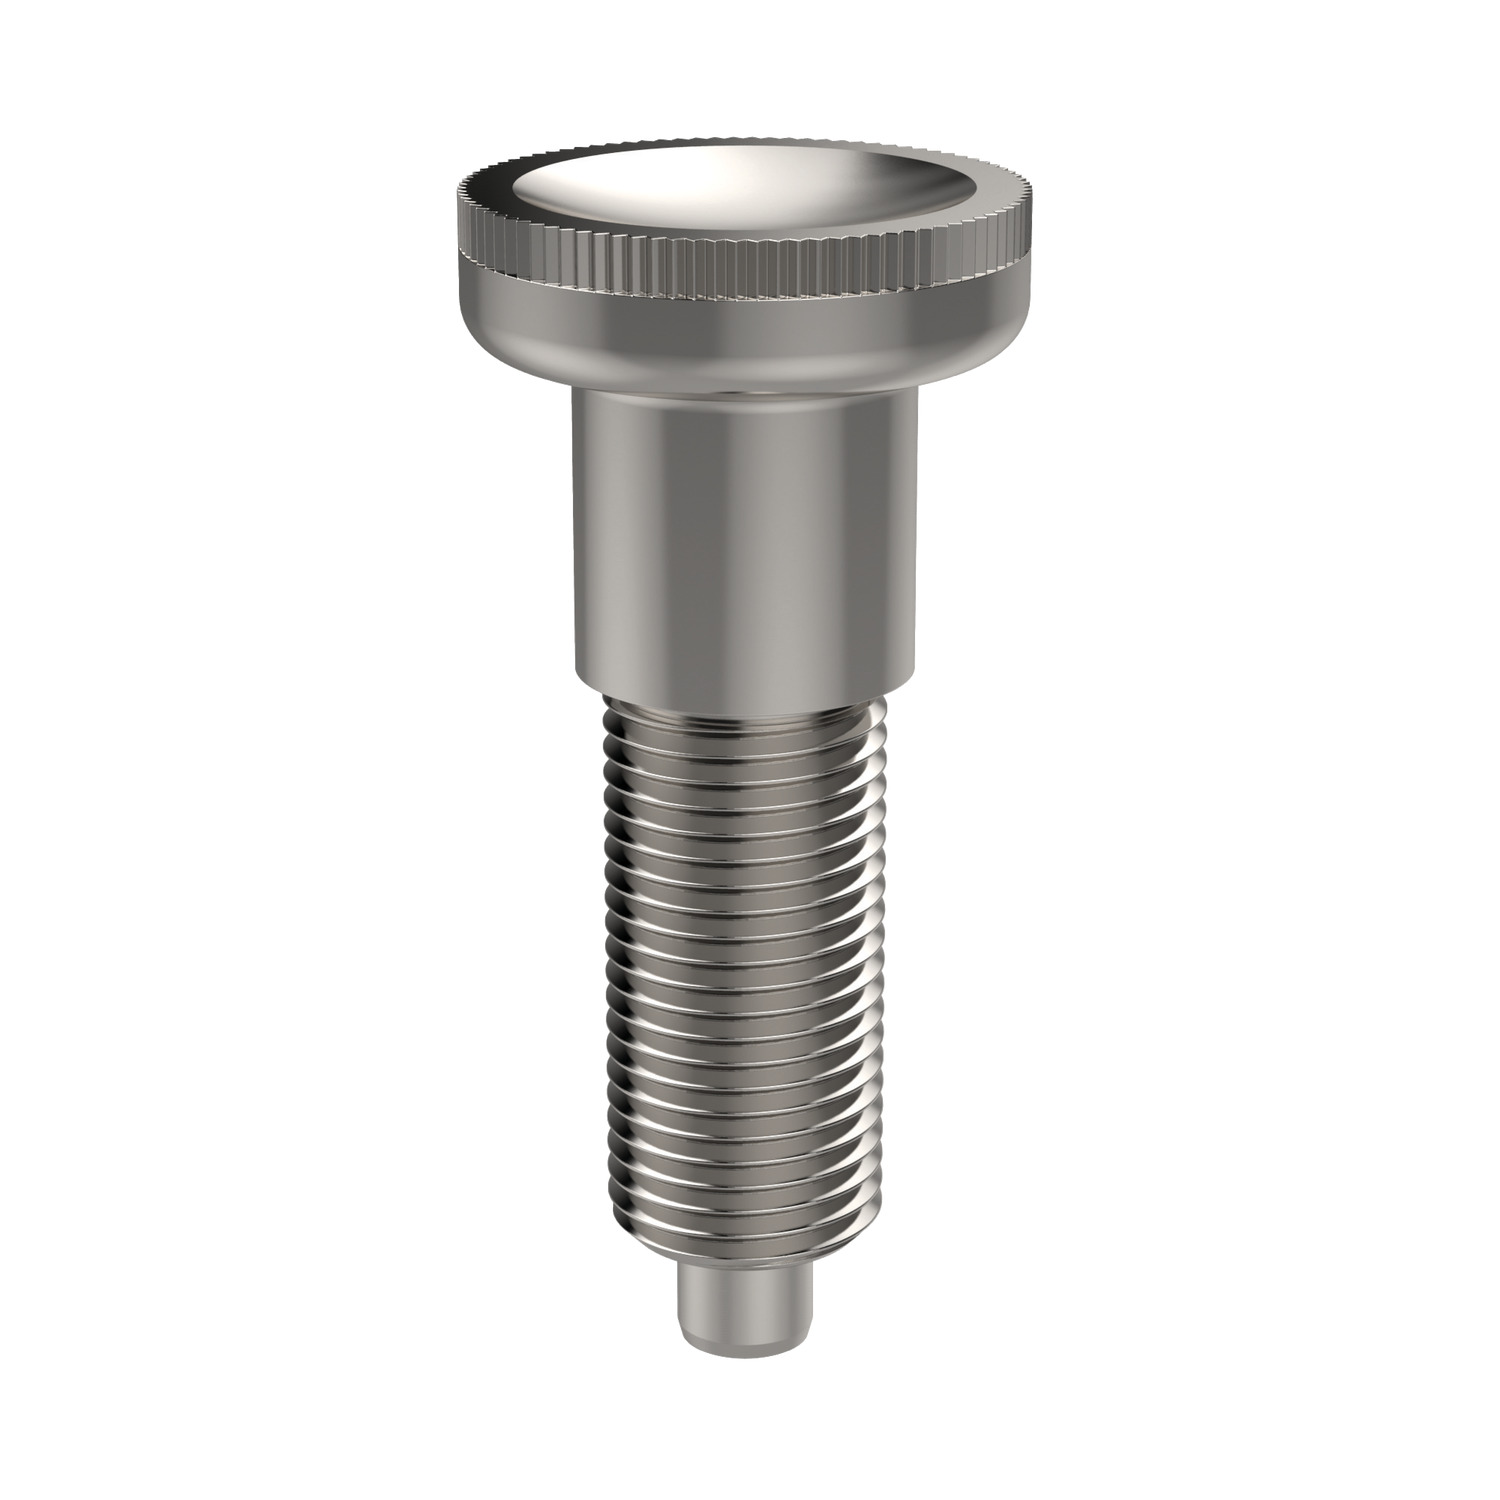 Index Plunger - Pull Grip An all stainless steek index plunger designed for spring-back location. Temperature resistance ranges from -30°C to +80°C.